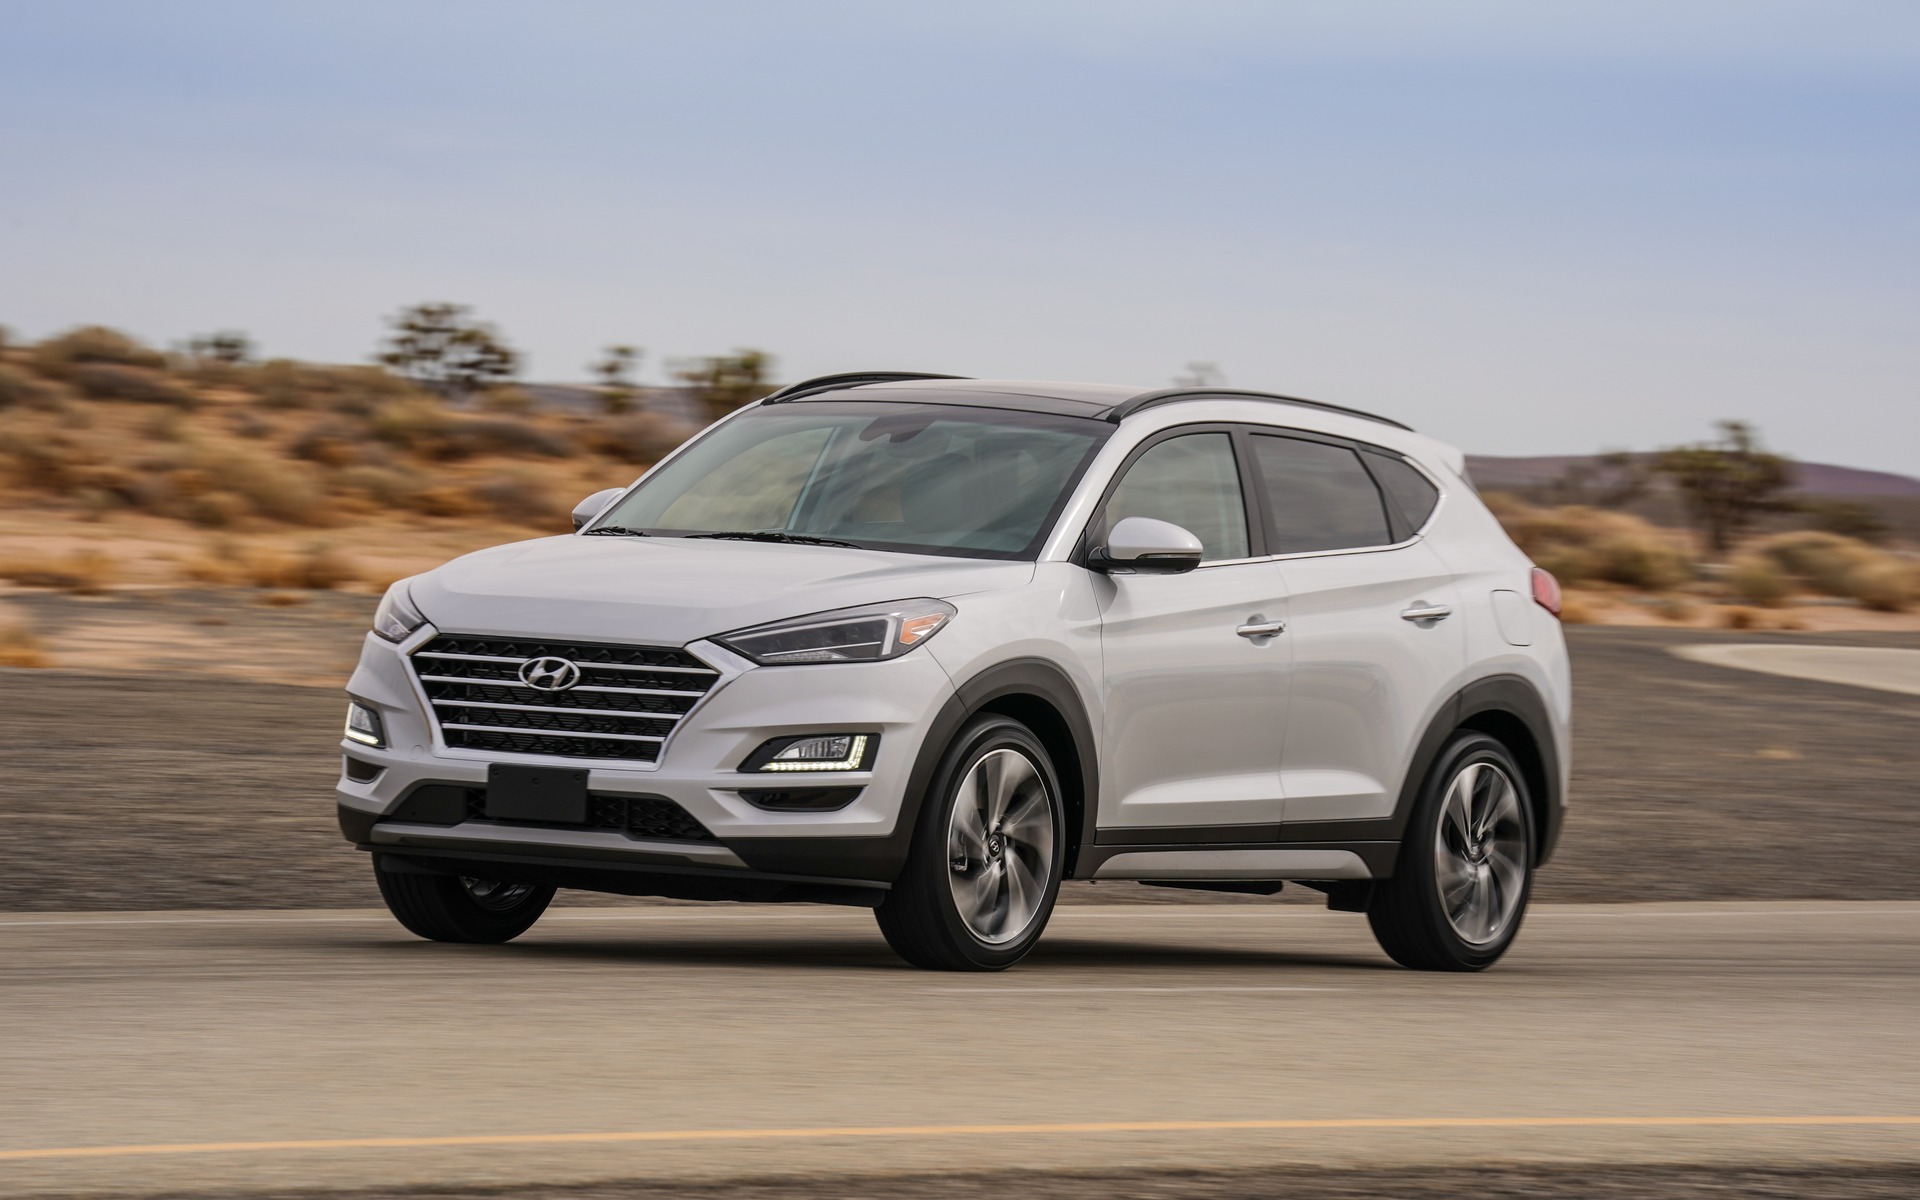 2019 Hyundai Tucson Prices, Reviews, and Photos - MotorTrend